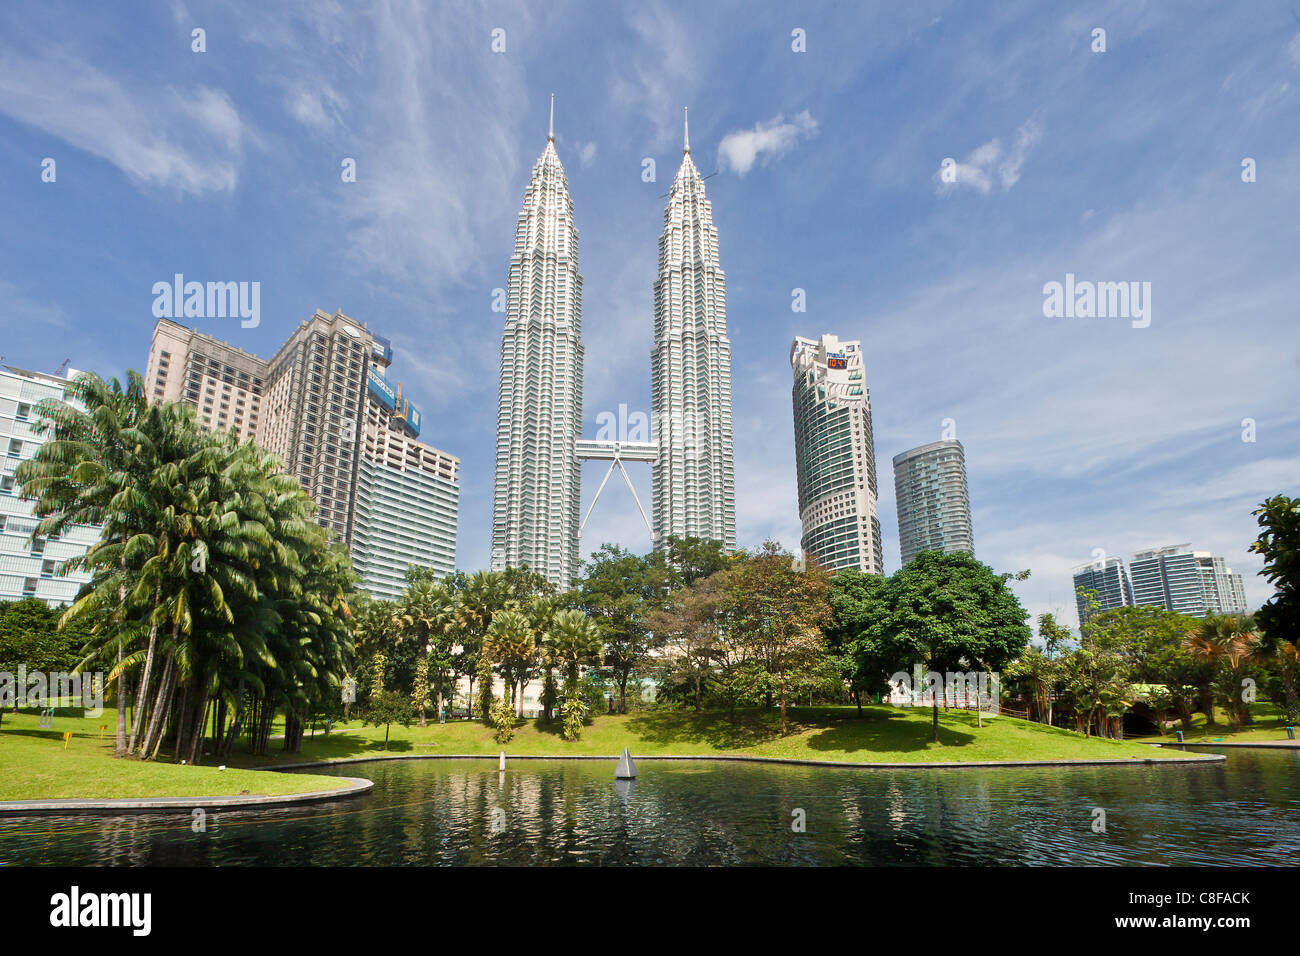 Malaysia, Asia, Kuala Lumpur, town, city, Petronas Towers, architecture, moulder, pond, toys boat, green, palms, park, park Stock Photo